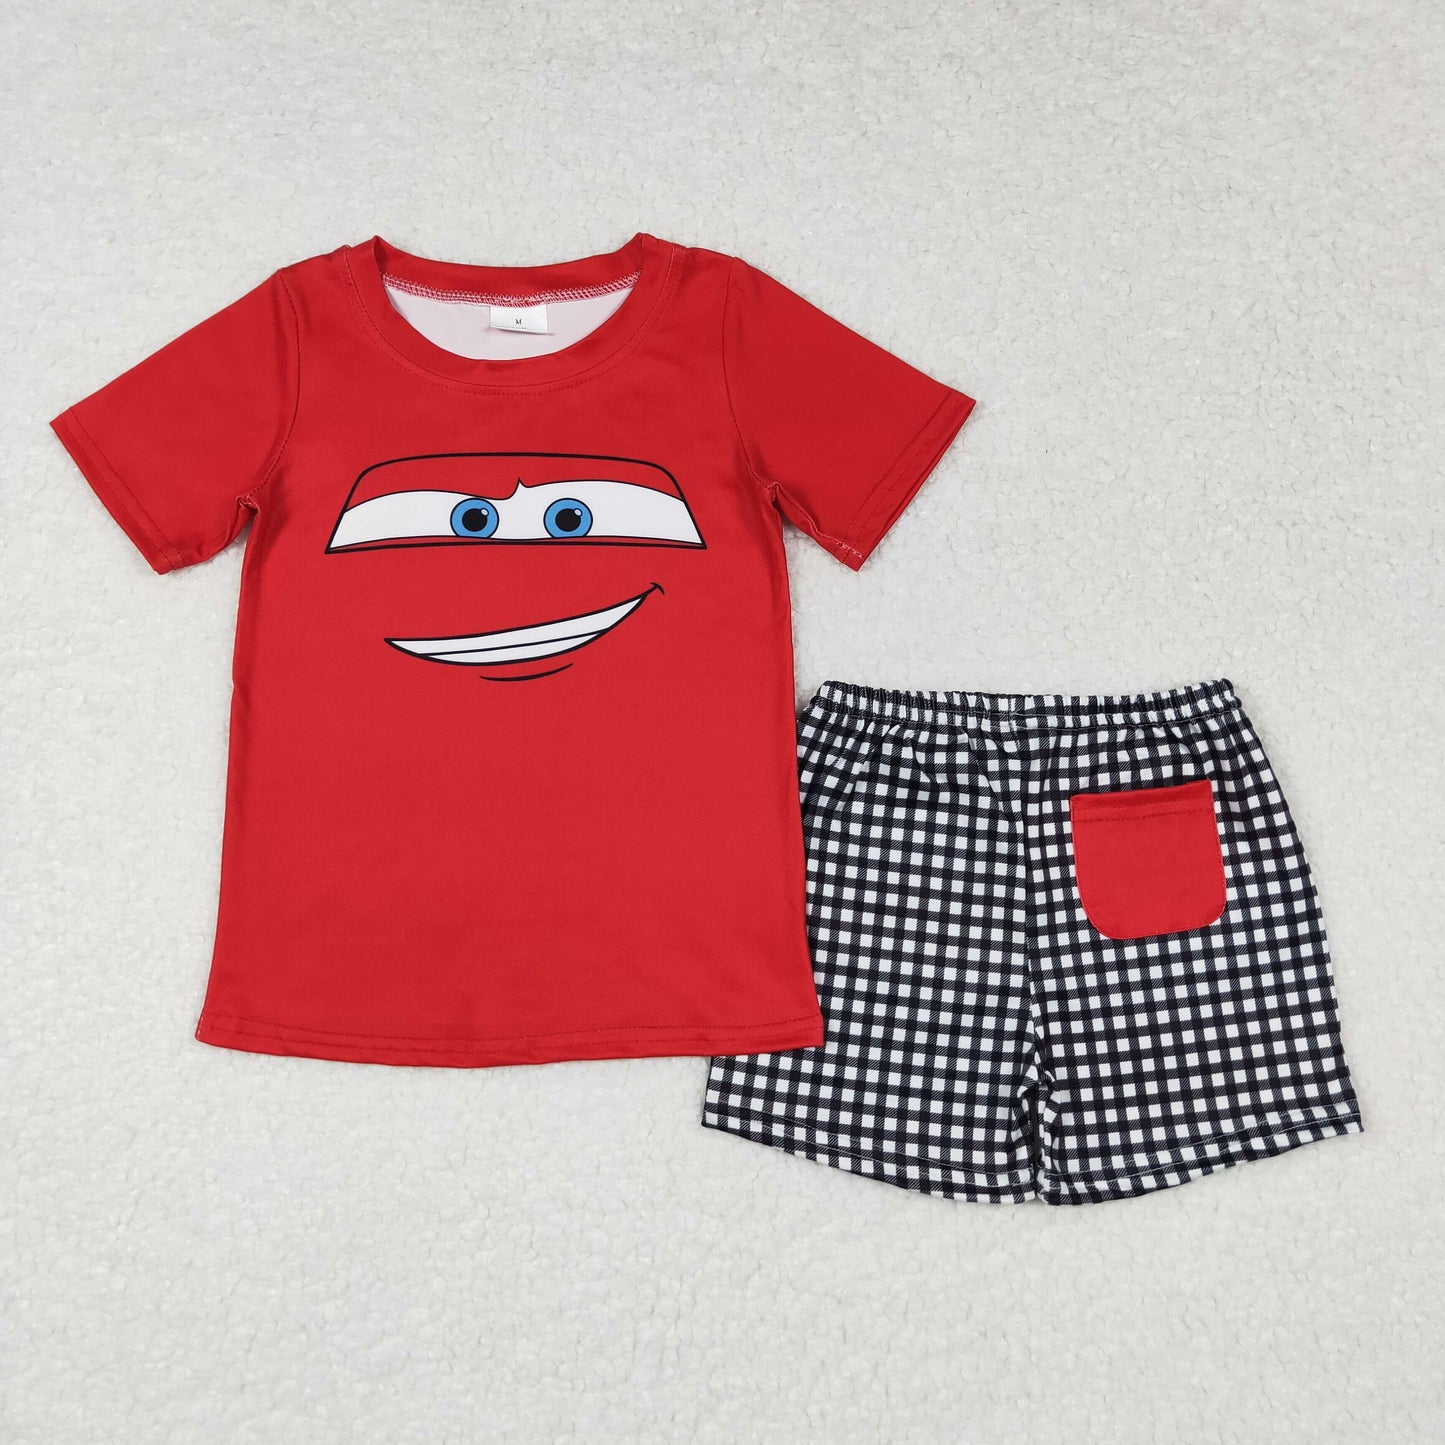 BSSO0654  cars cartoon car red short sleeve plaid shorts suit